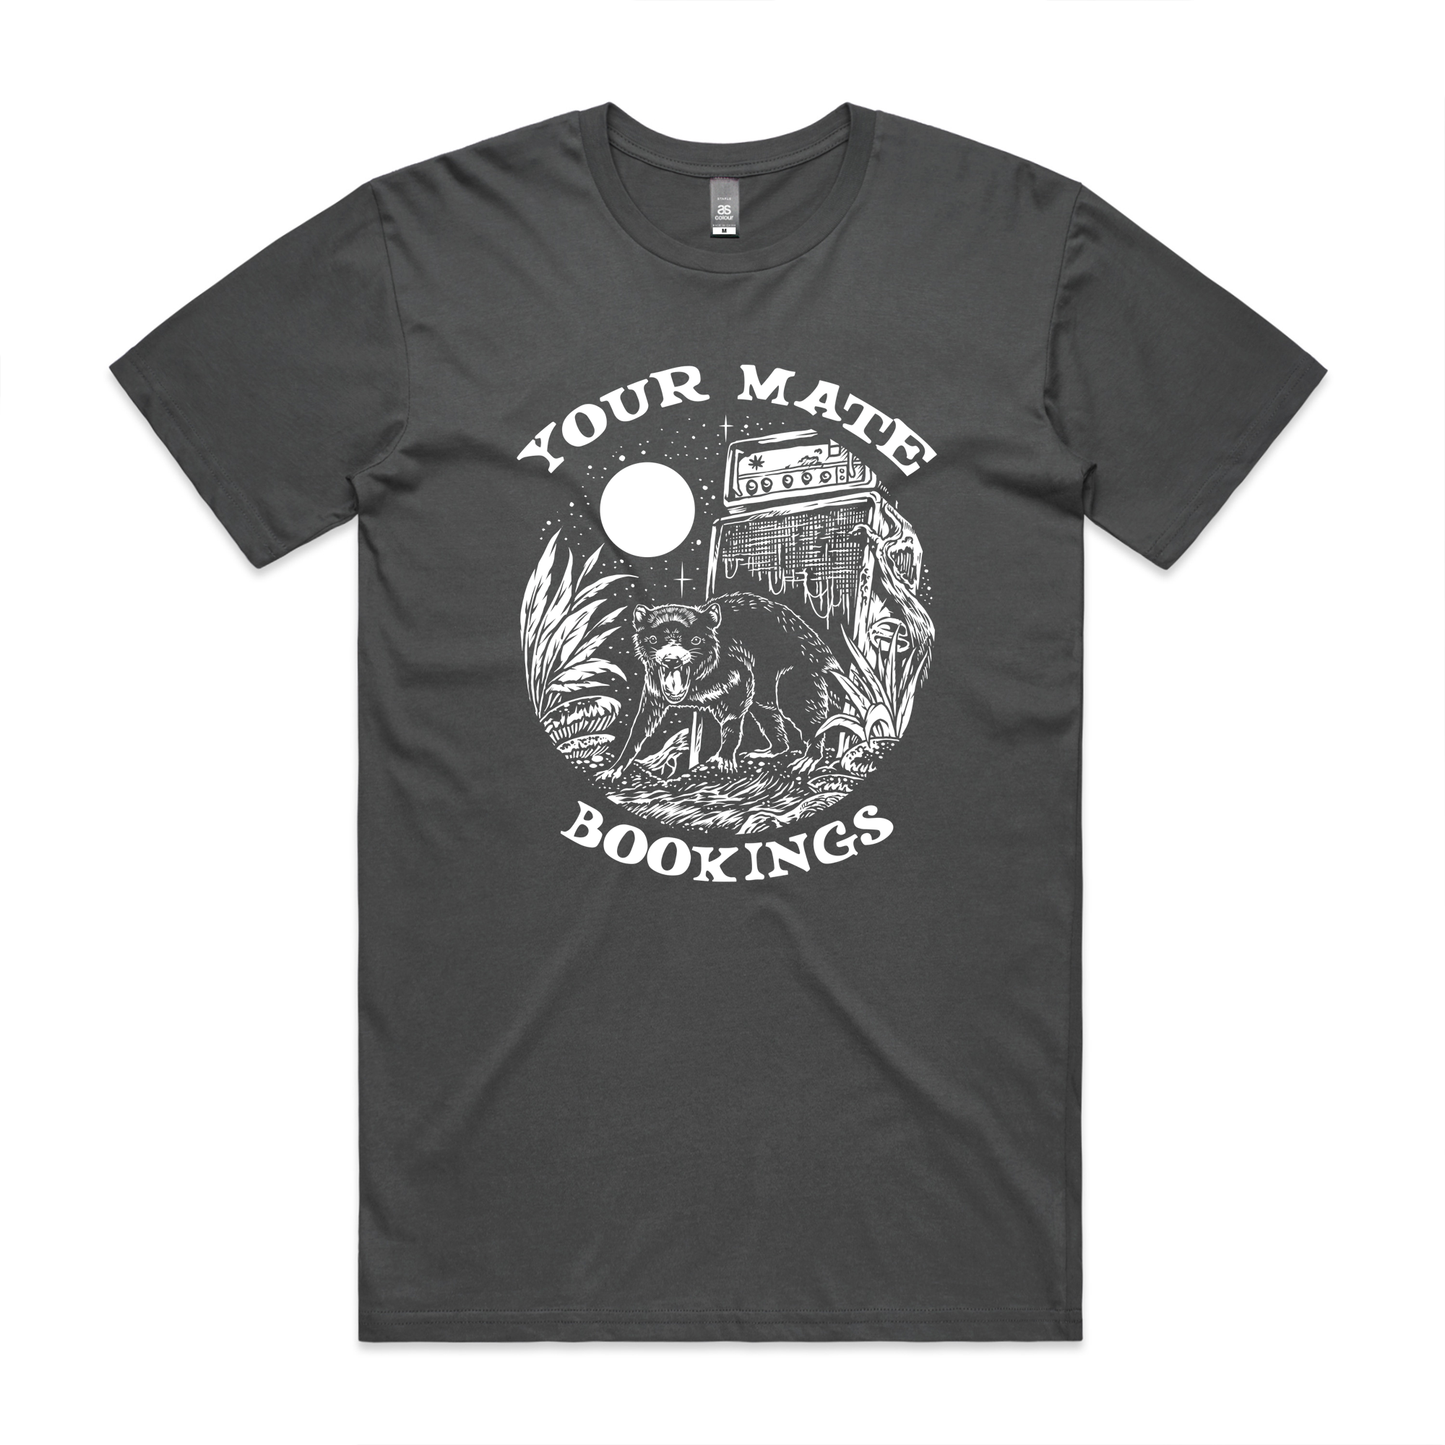 Your Mate Bookings Tee